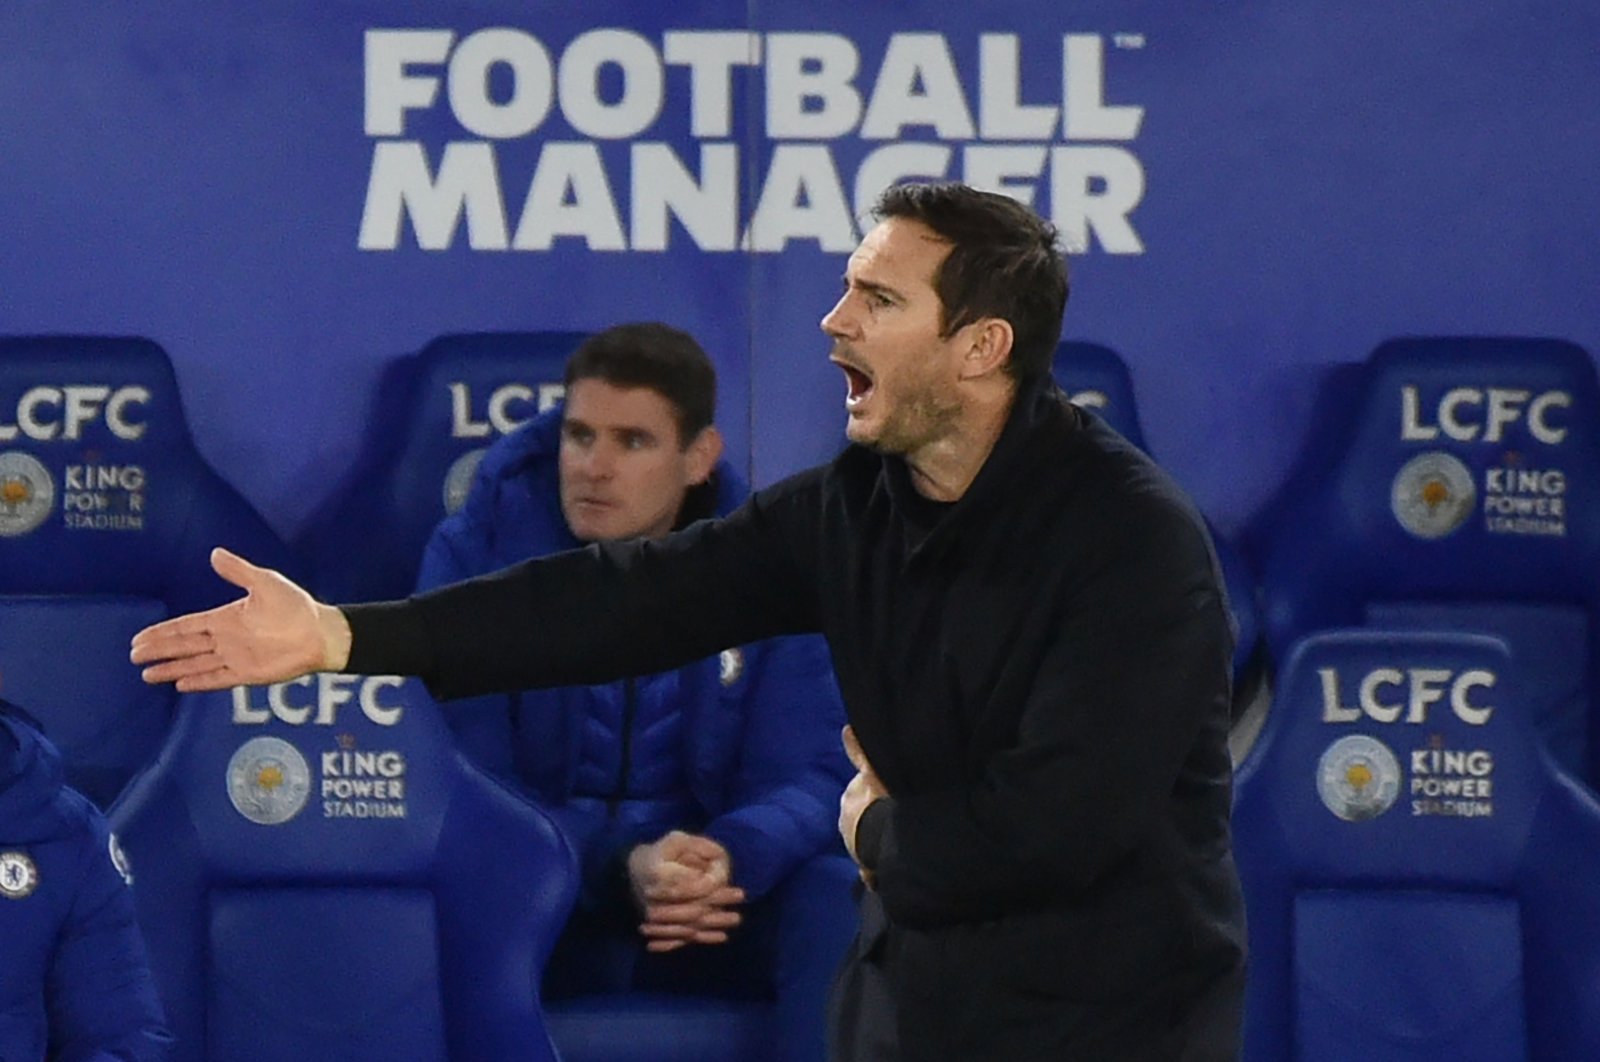 Chelsea manager Frank Lampard gestures during the English Premier League football match between Leicester City and Chelsea at the King Power Stadium in Leicester, England, Jan. 19, 2021. (AFP Photo)